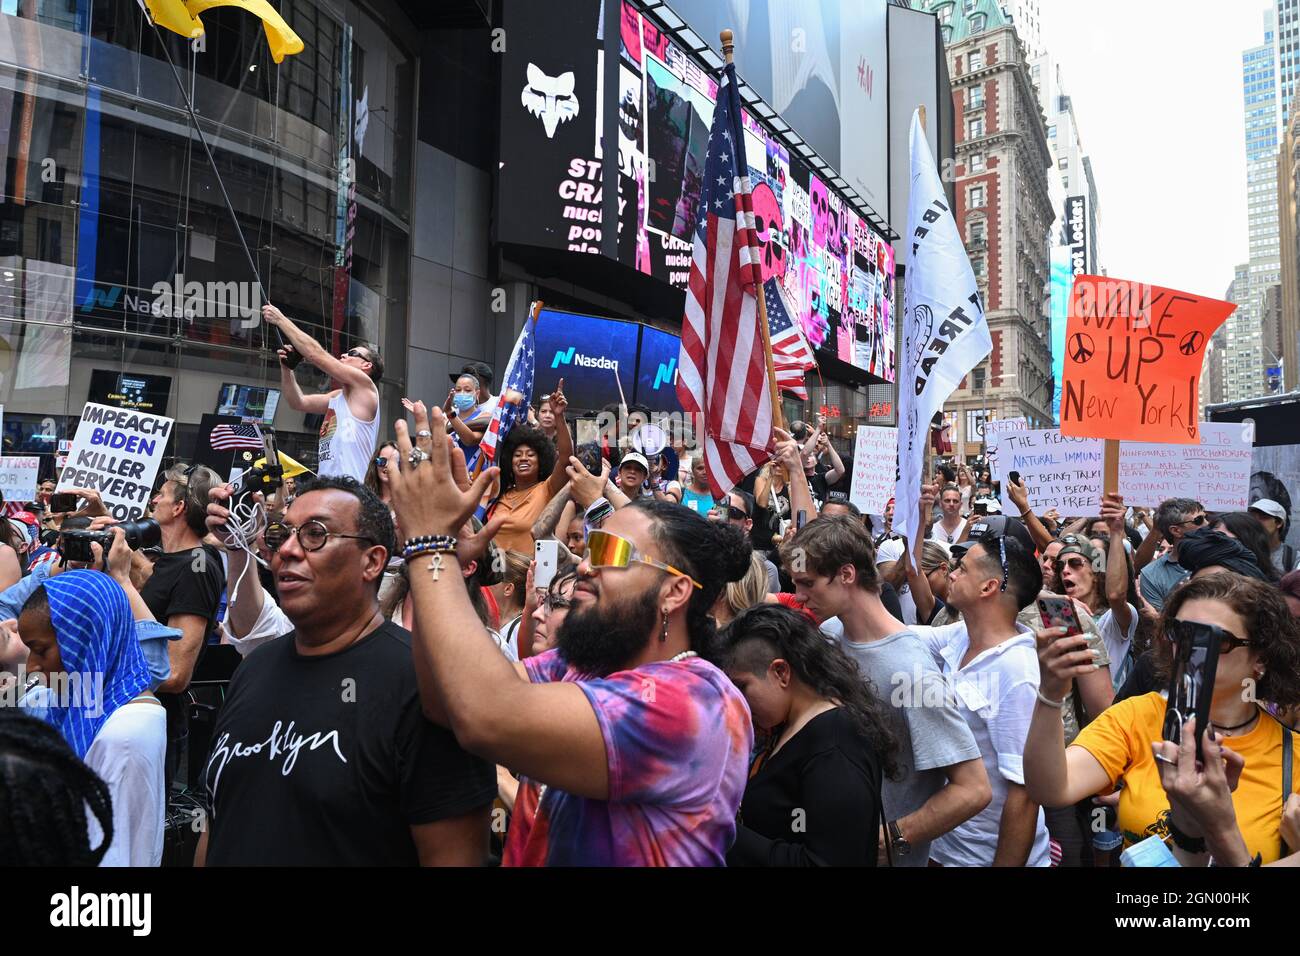 Anti-vaccine protesters gather in Times Square for a rally against vaccine mandates on September 18, 2021 in New York. Stock Photo